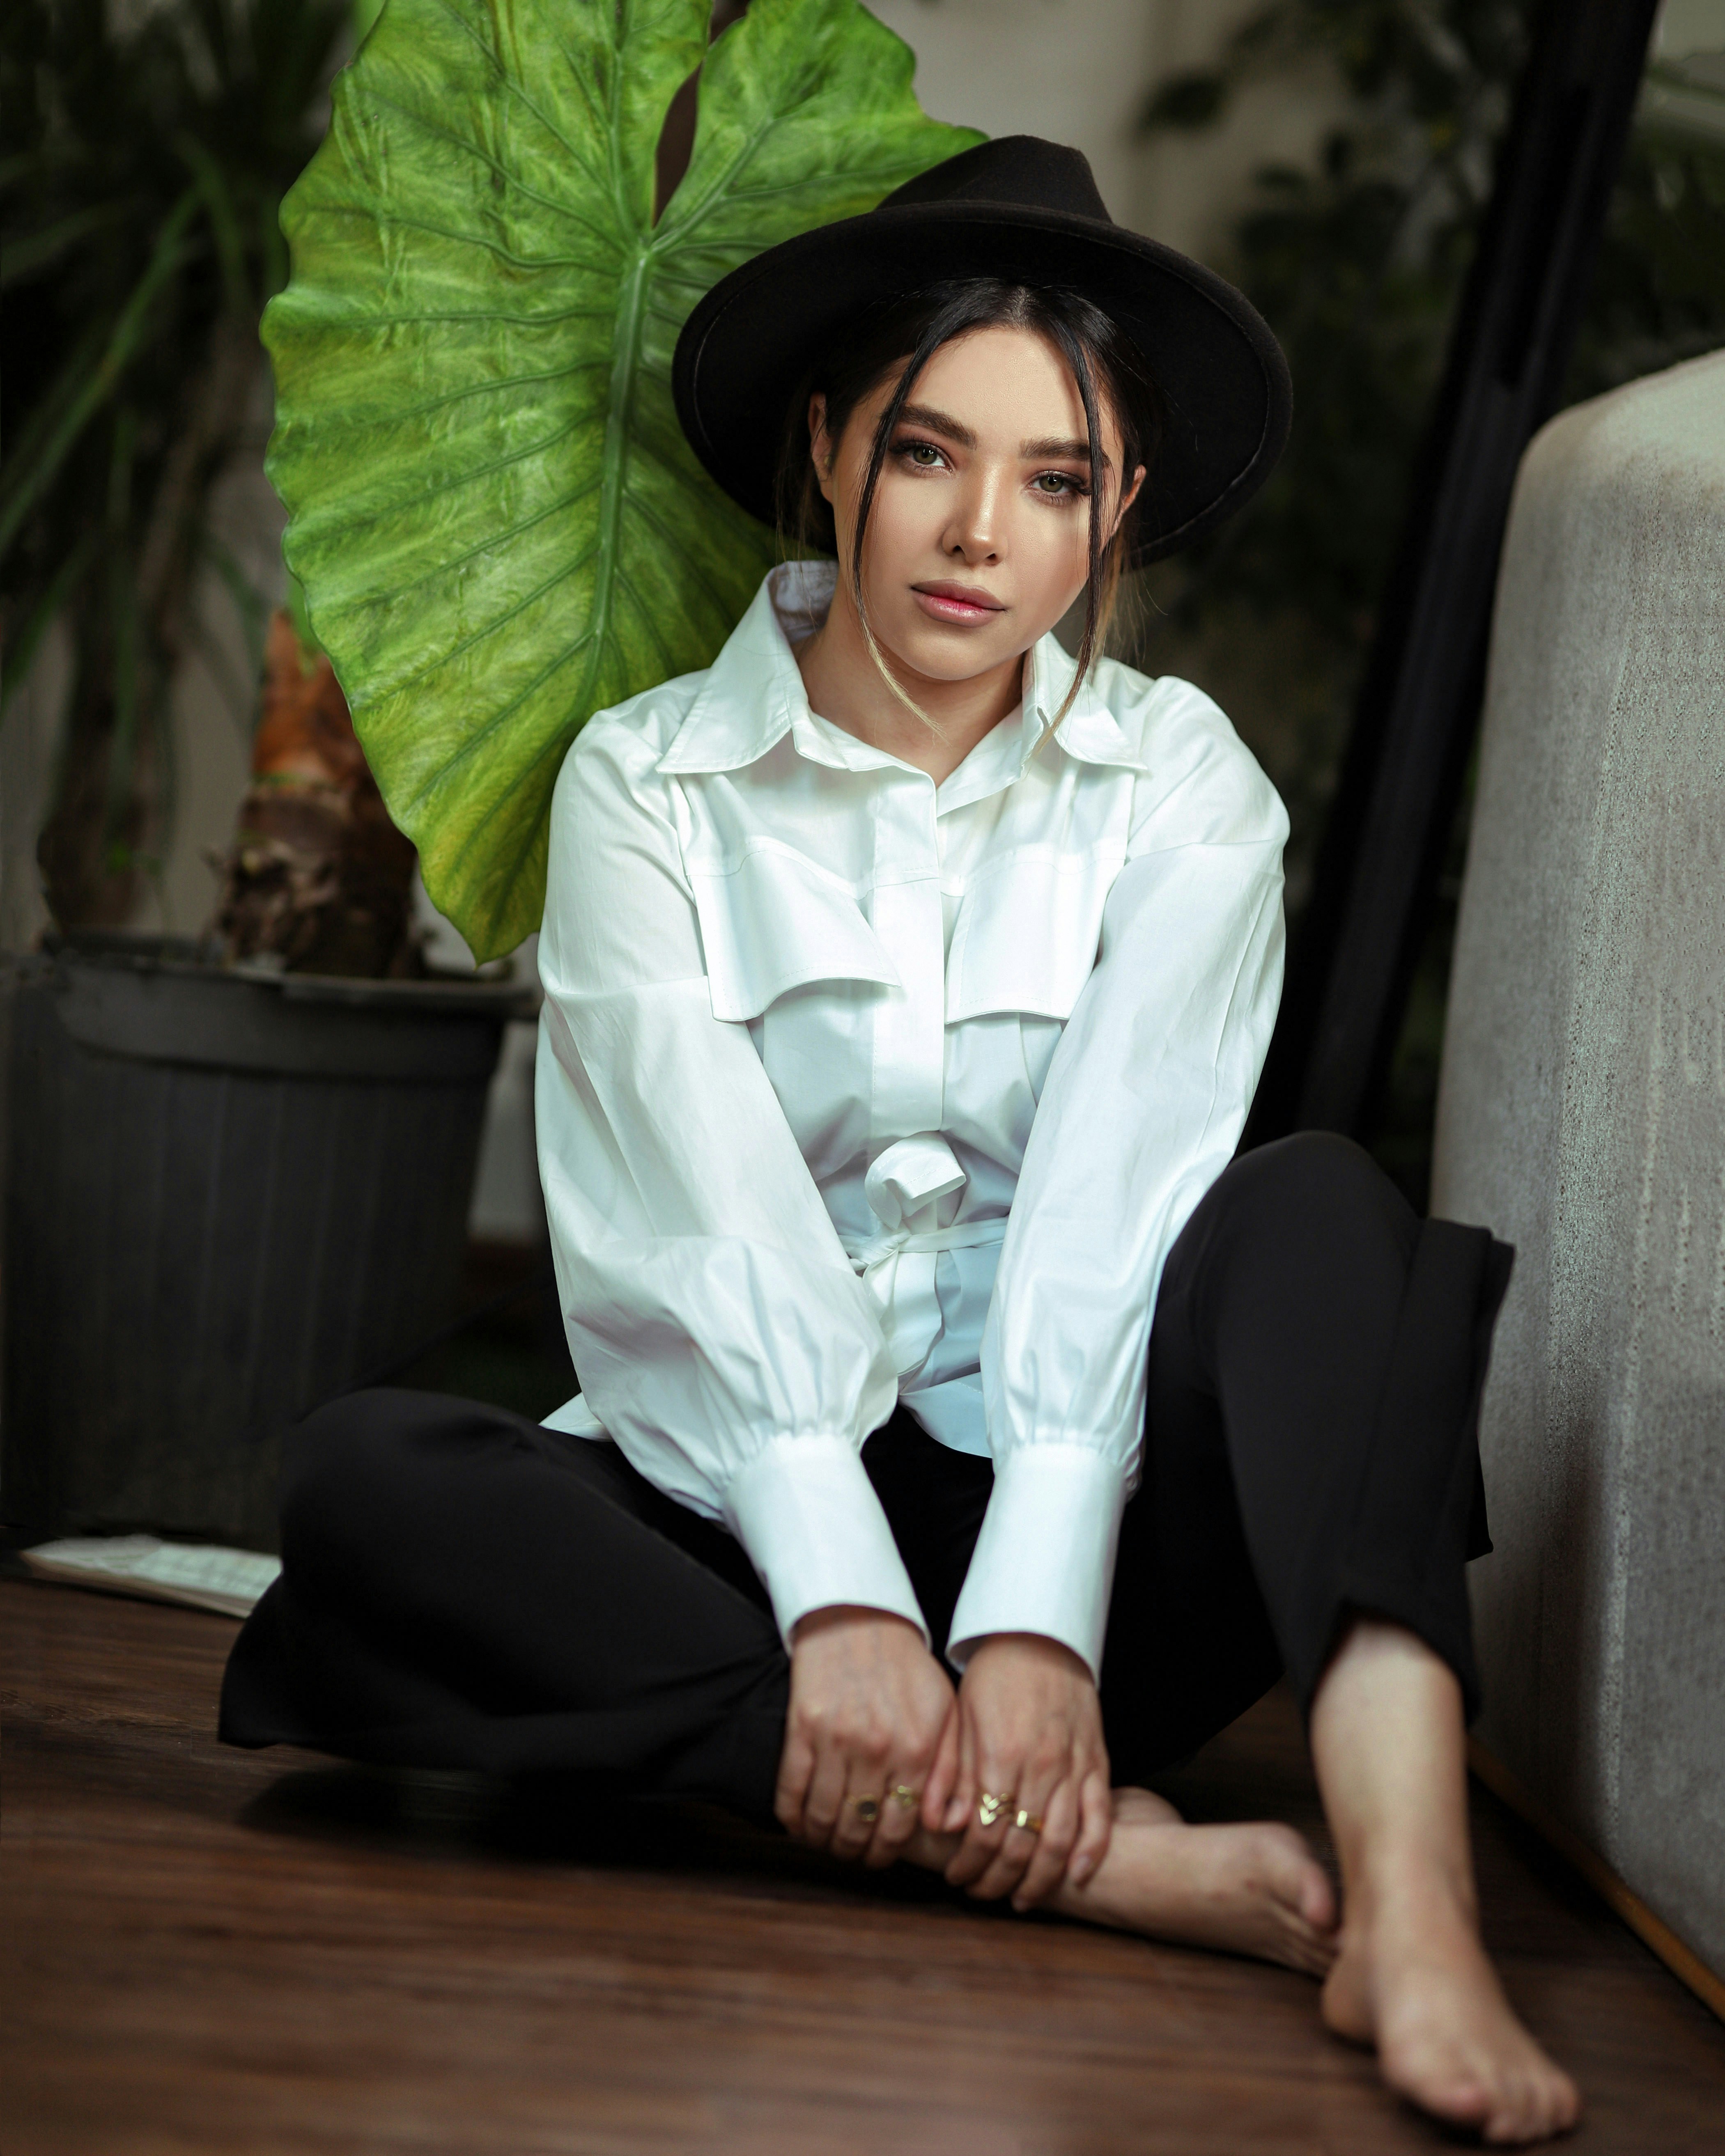 great photo recipe,how to photograph woman in white button up shirt and black pants sitting on gray sofa